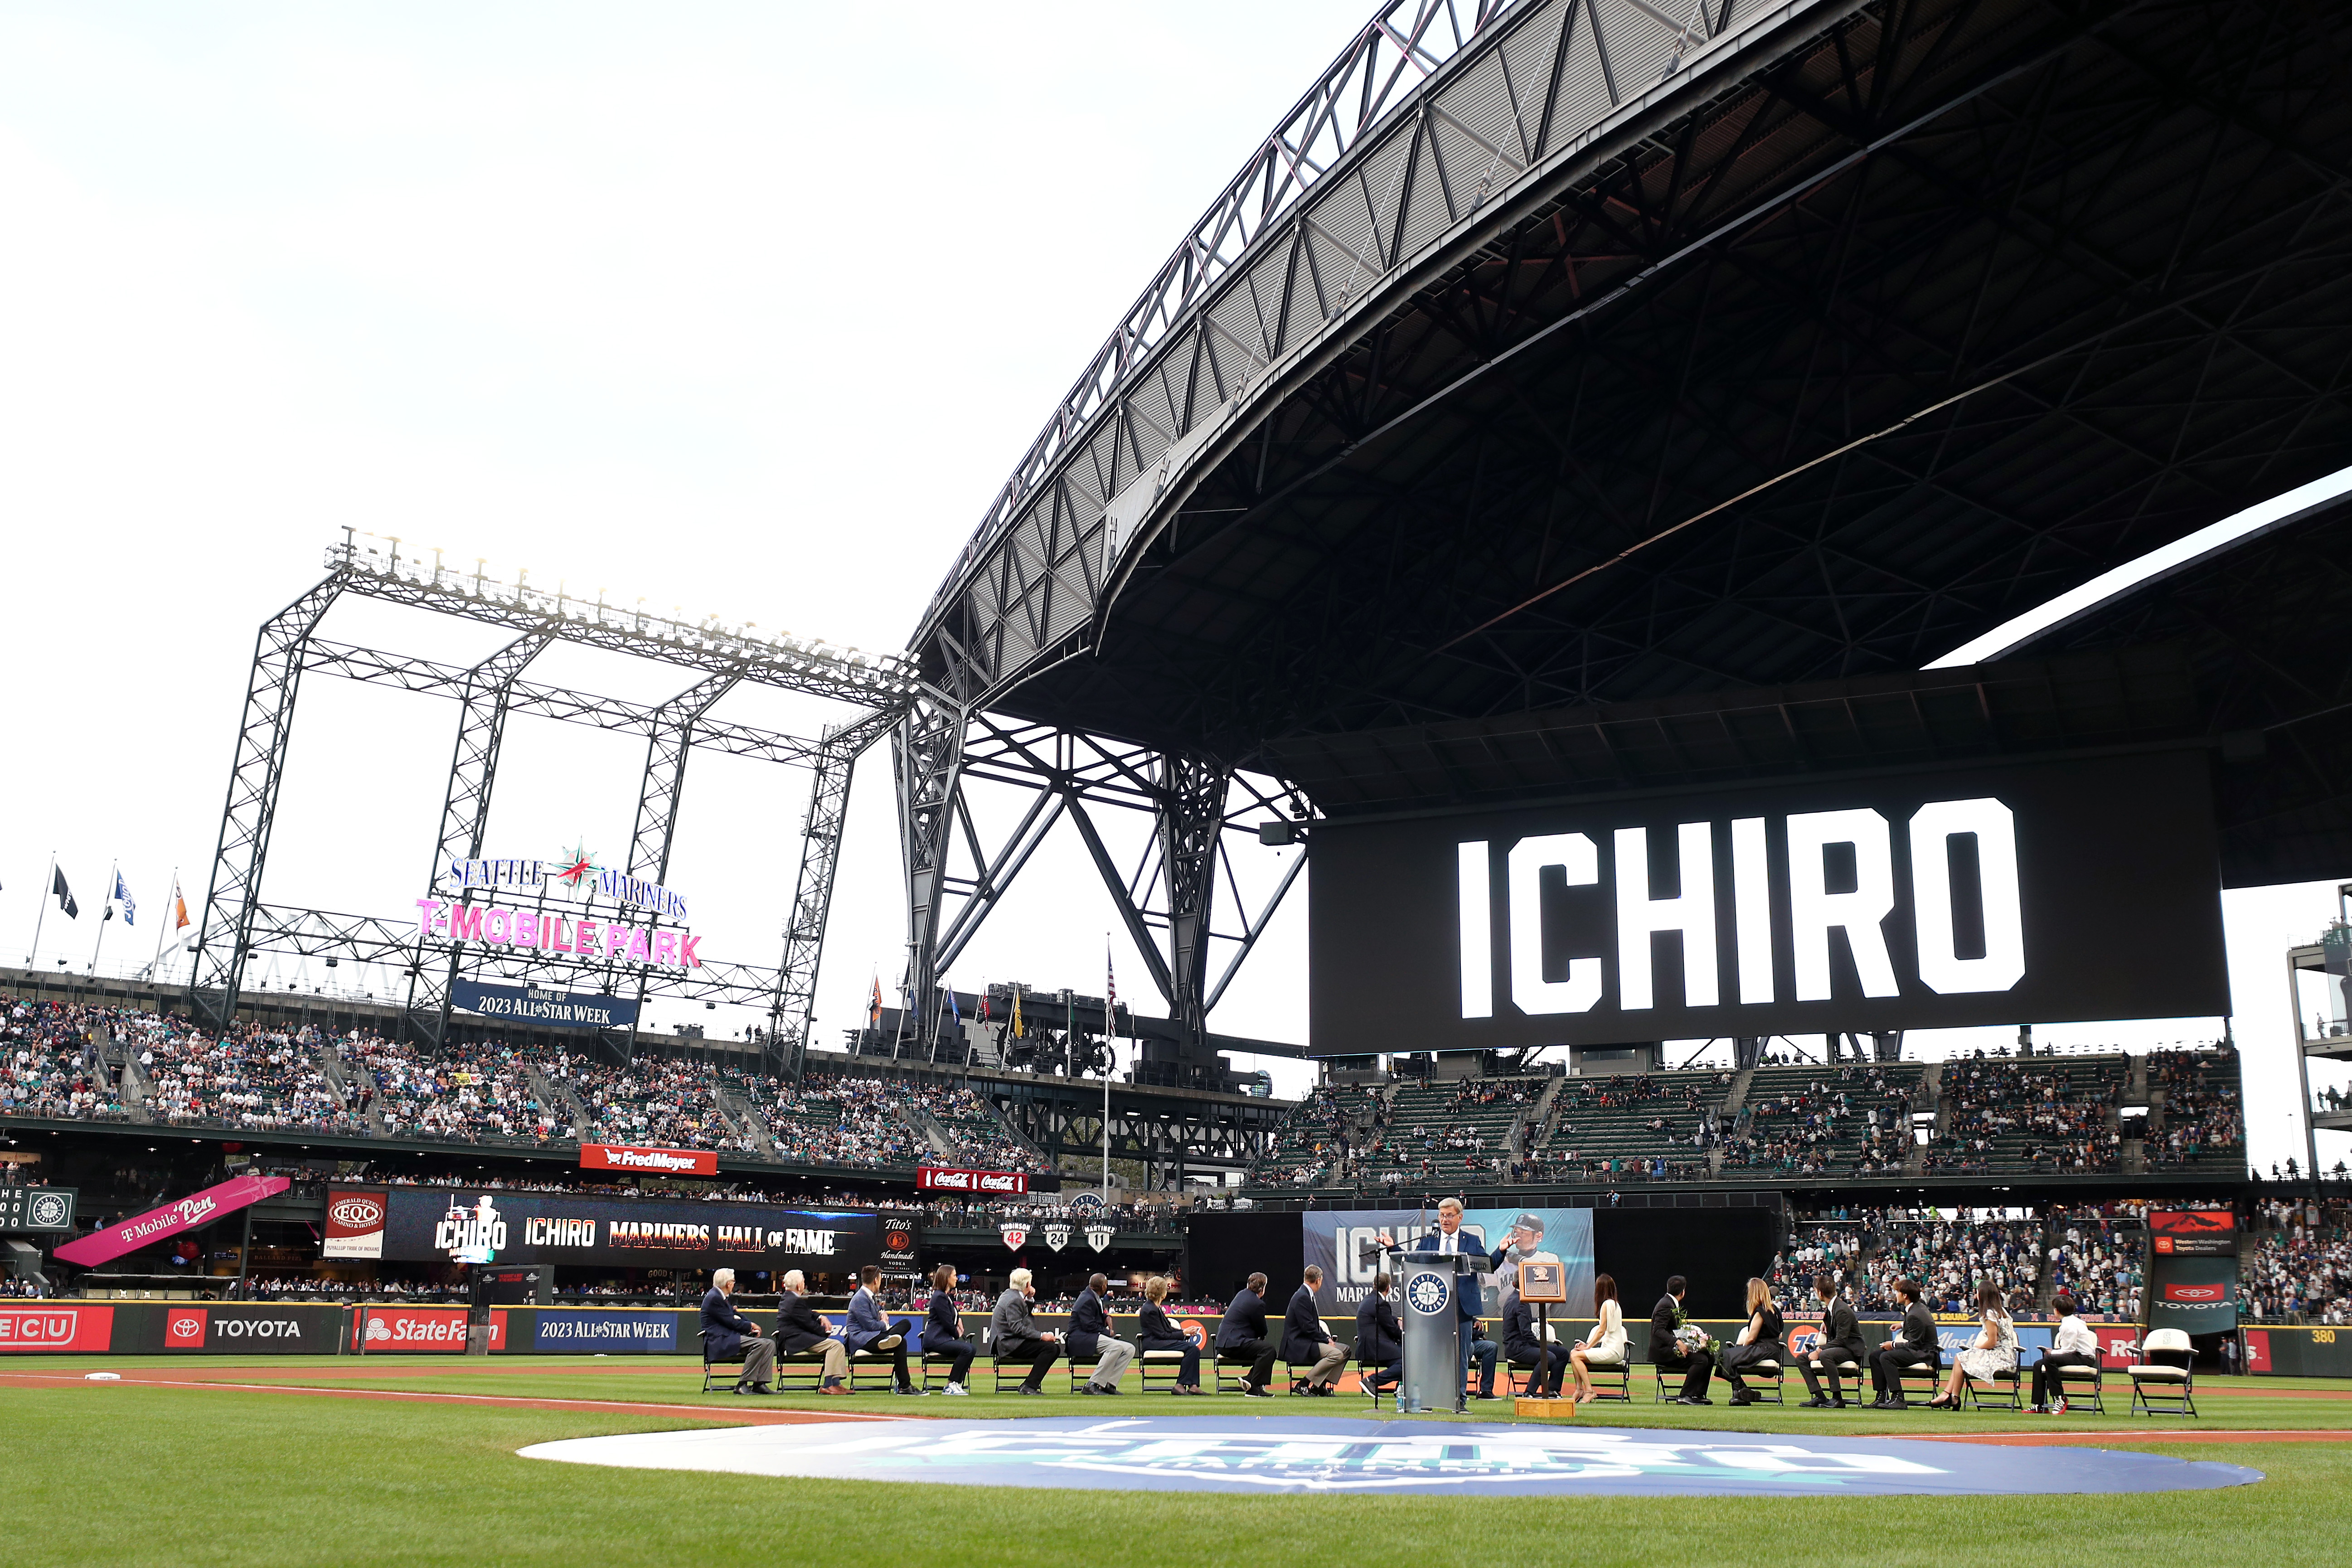 Watch: Ichiro delivers stirring speech after receiving honors from